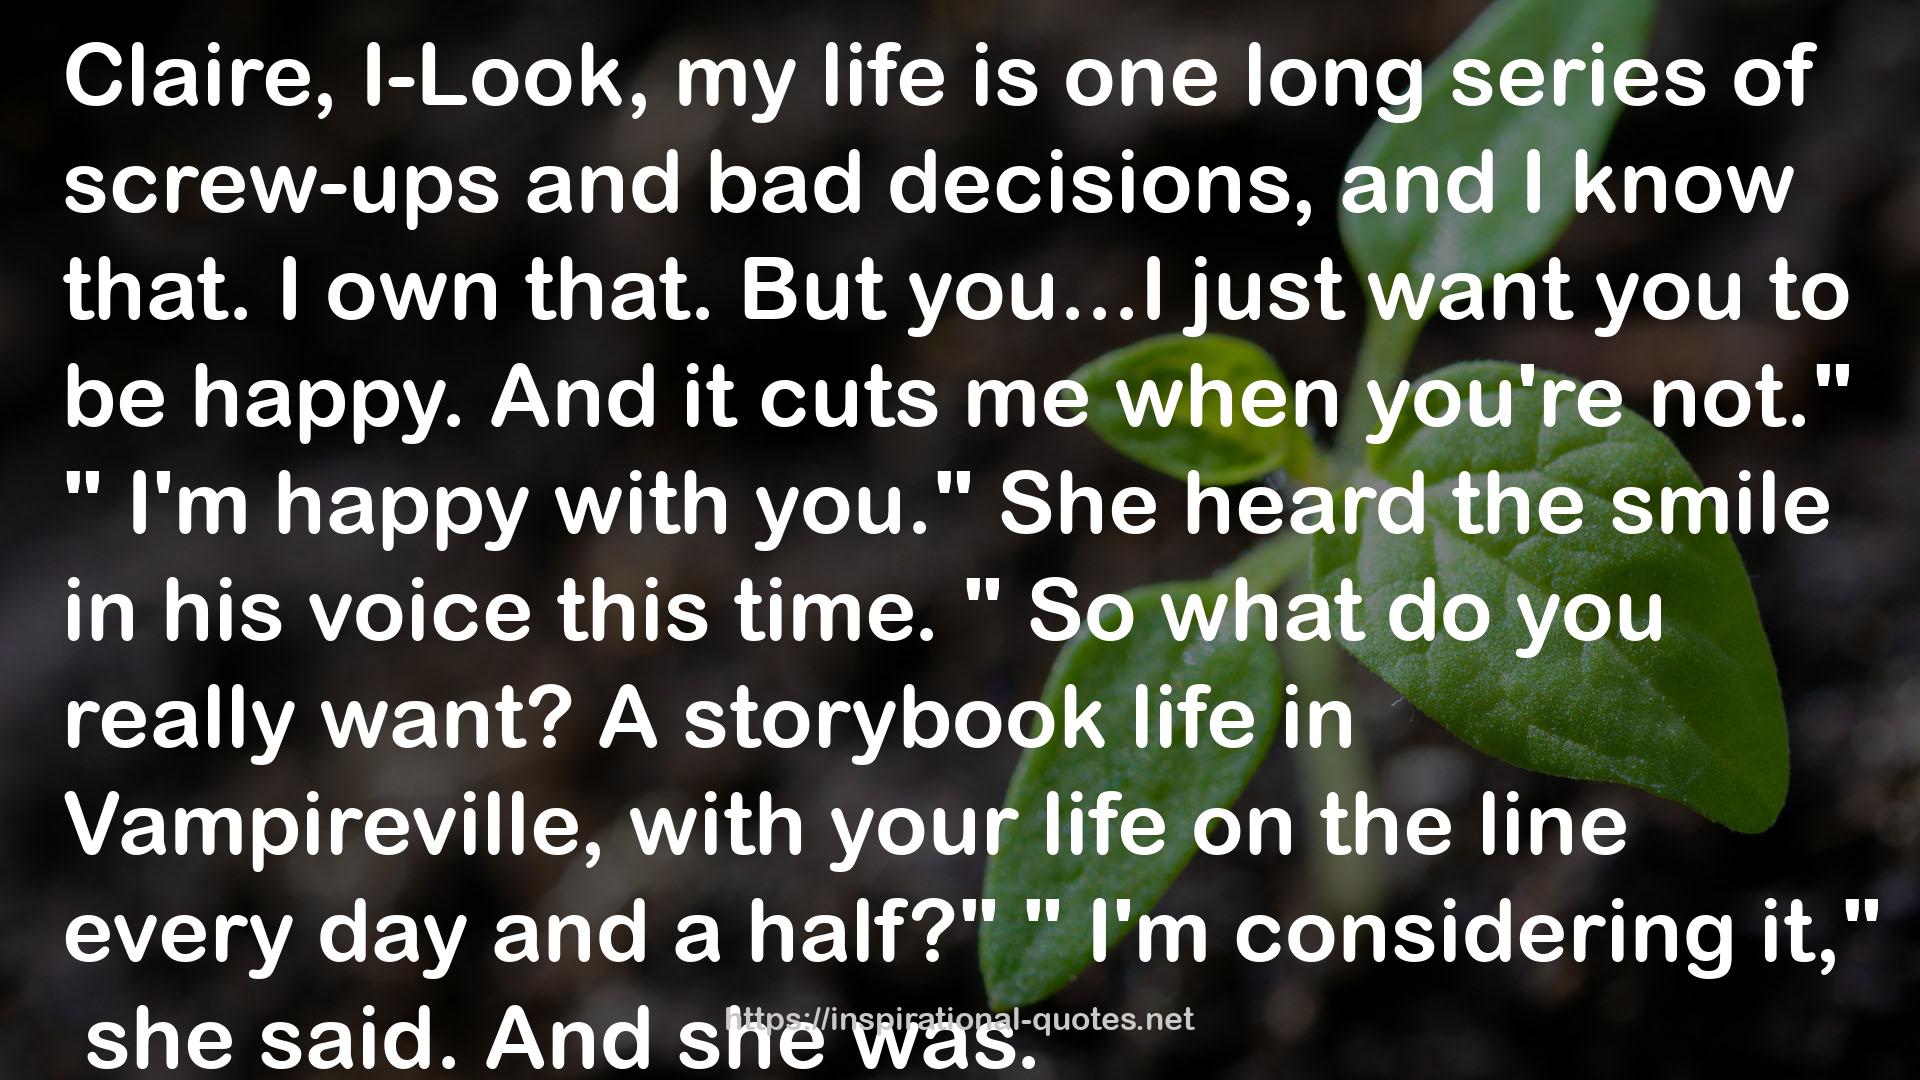 A storybook life  QUOTES